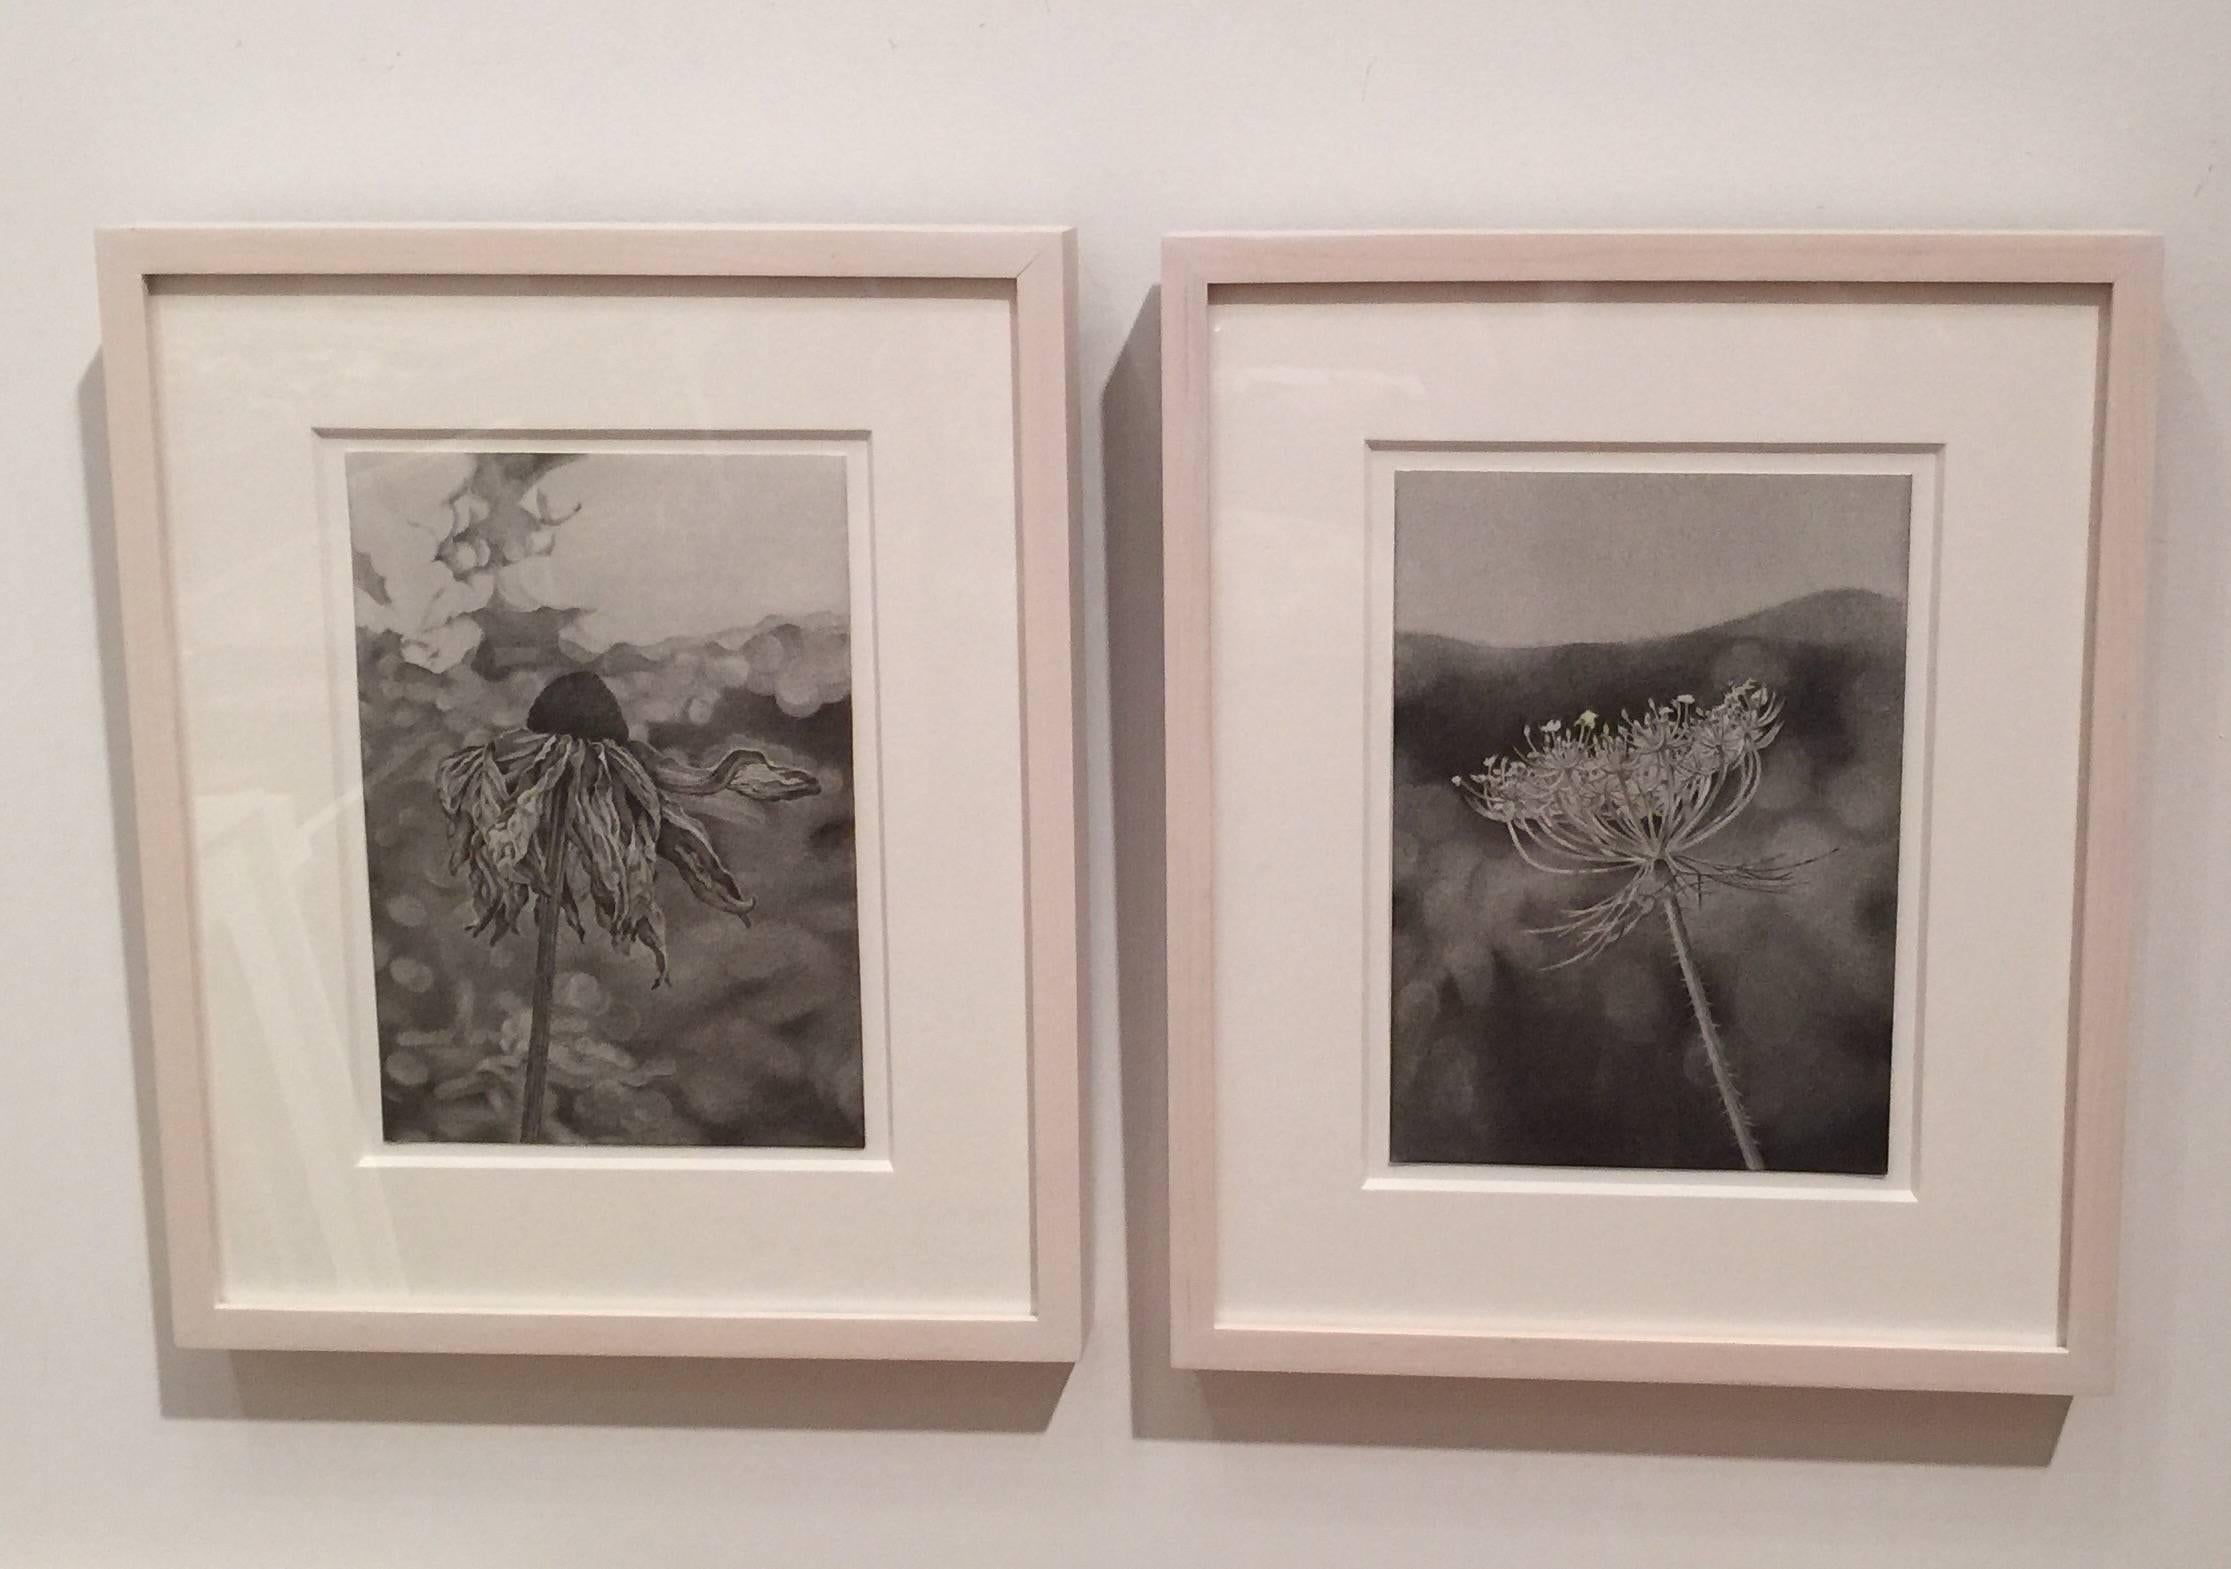 Field of Flowers 1, photorealist graphite floral drawing, 2016 - Art by Mary Reilly